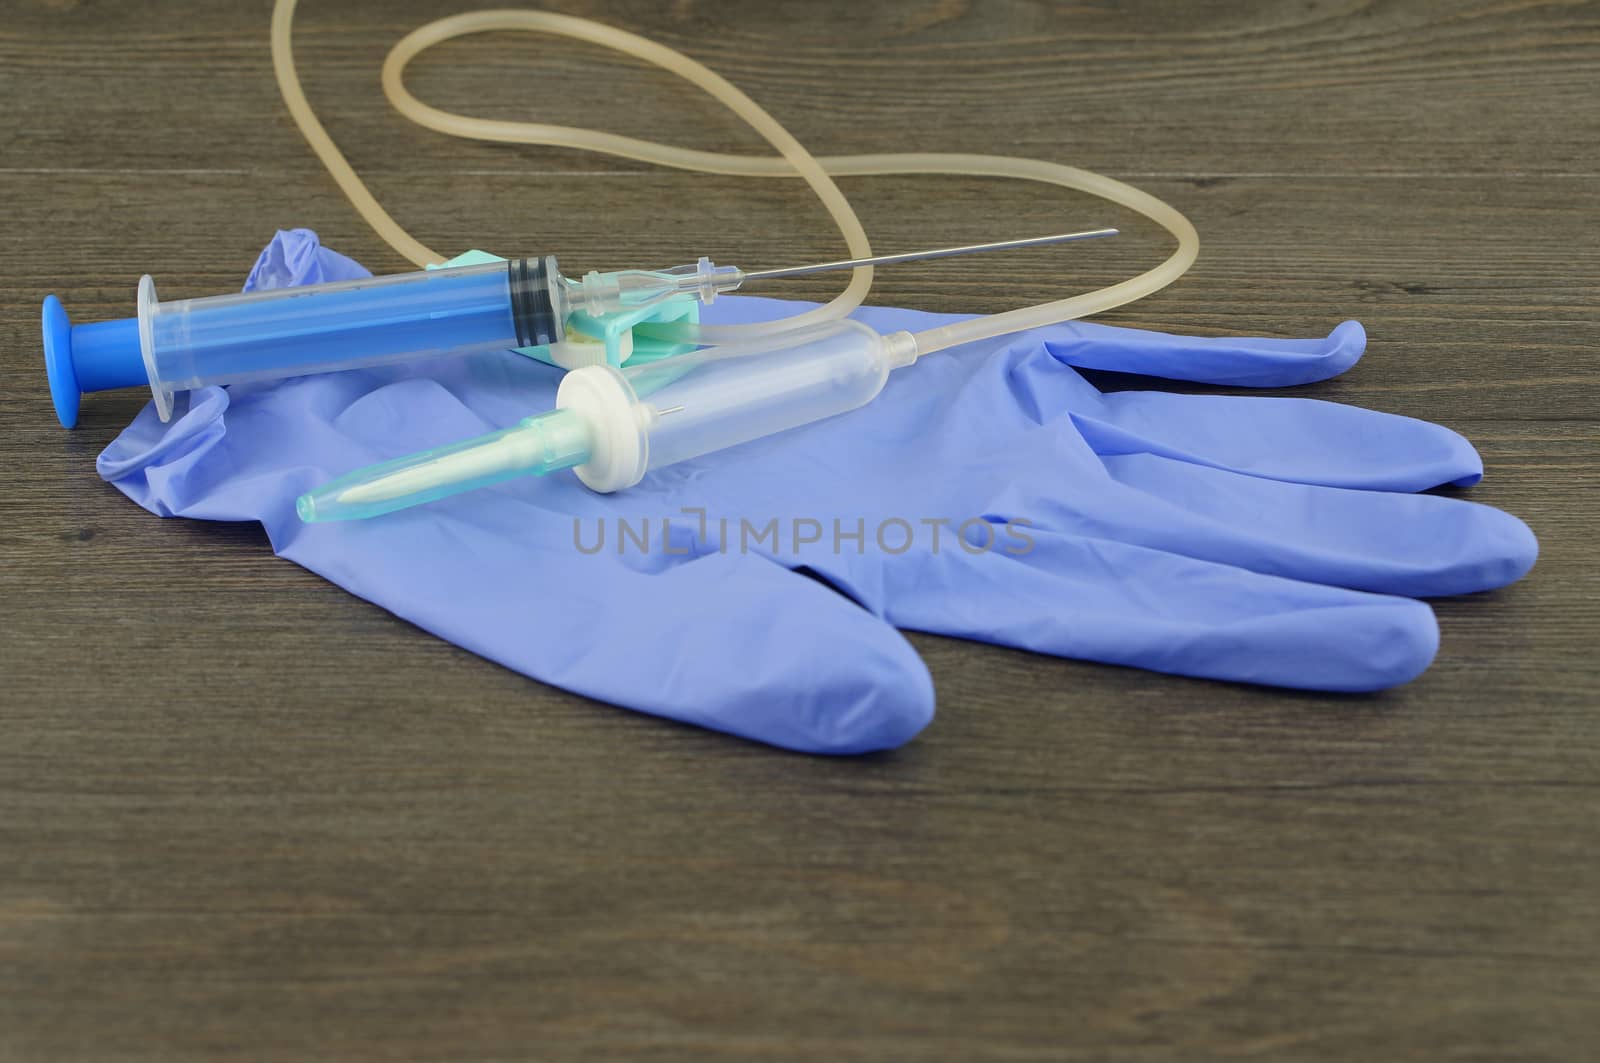 Disposable infusion set, syringe and glove placed on wooden table.
                              